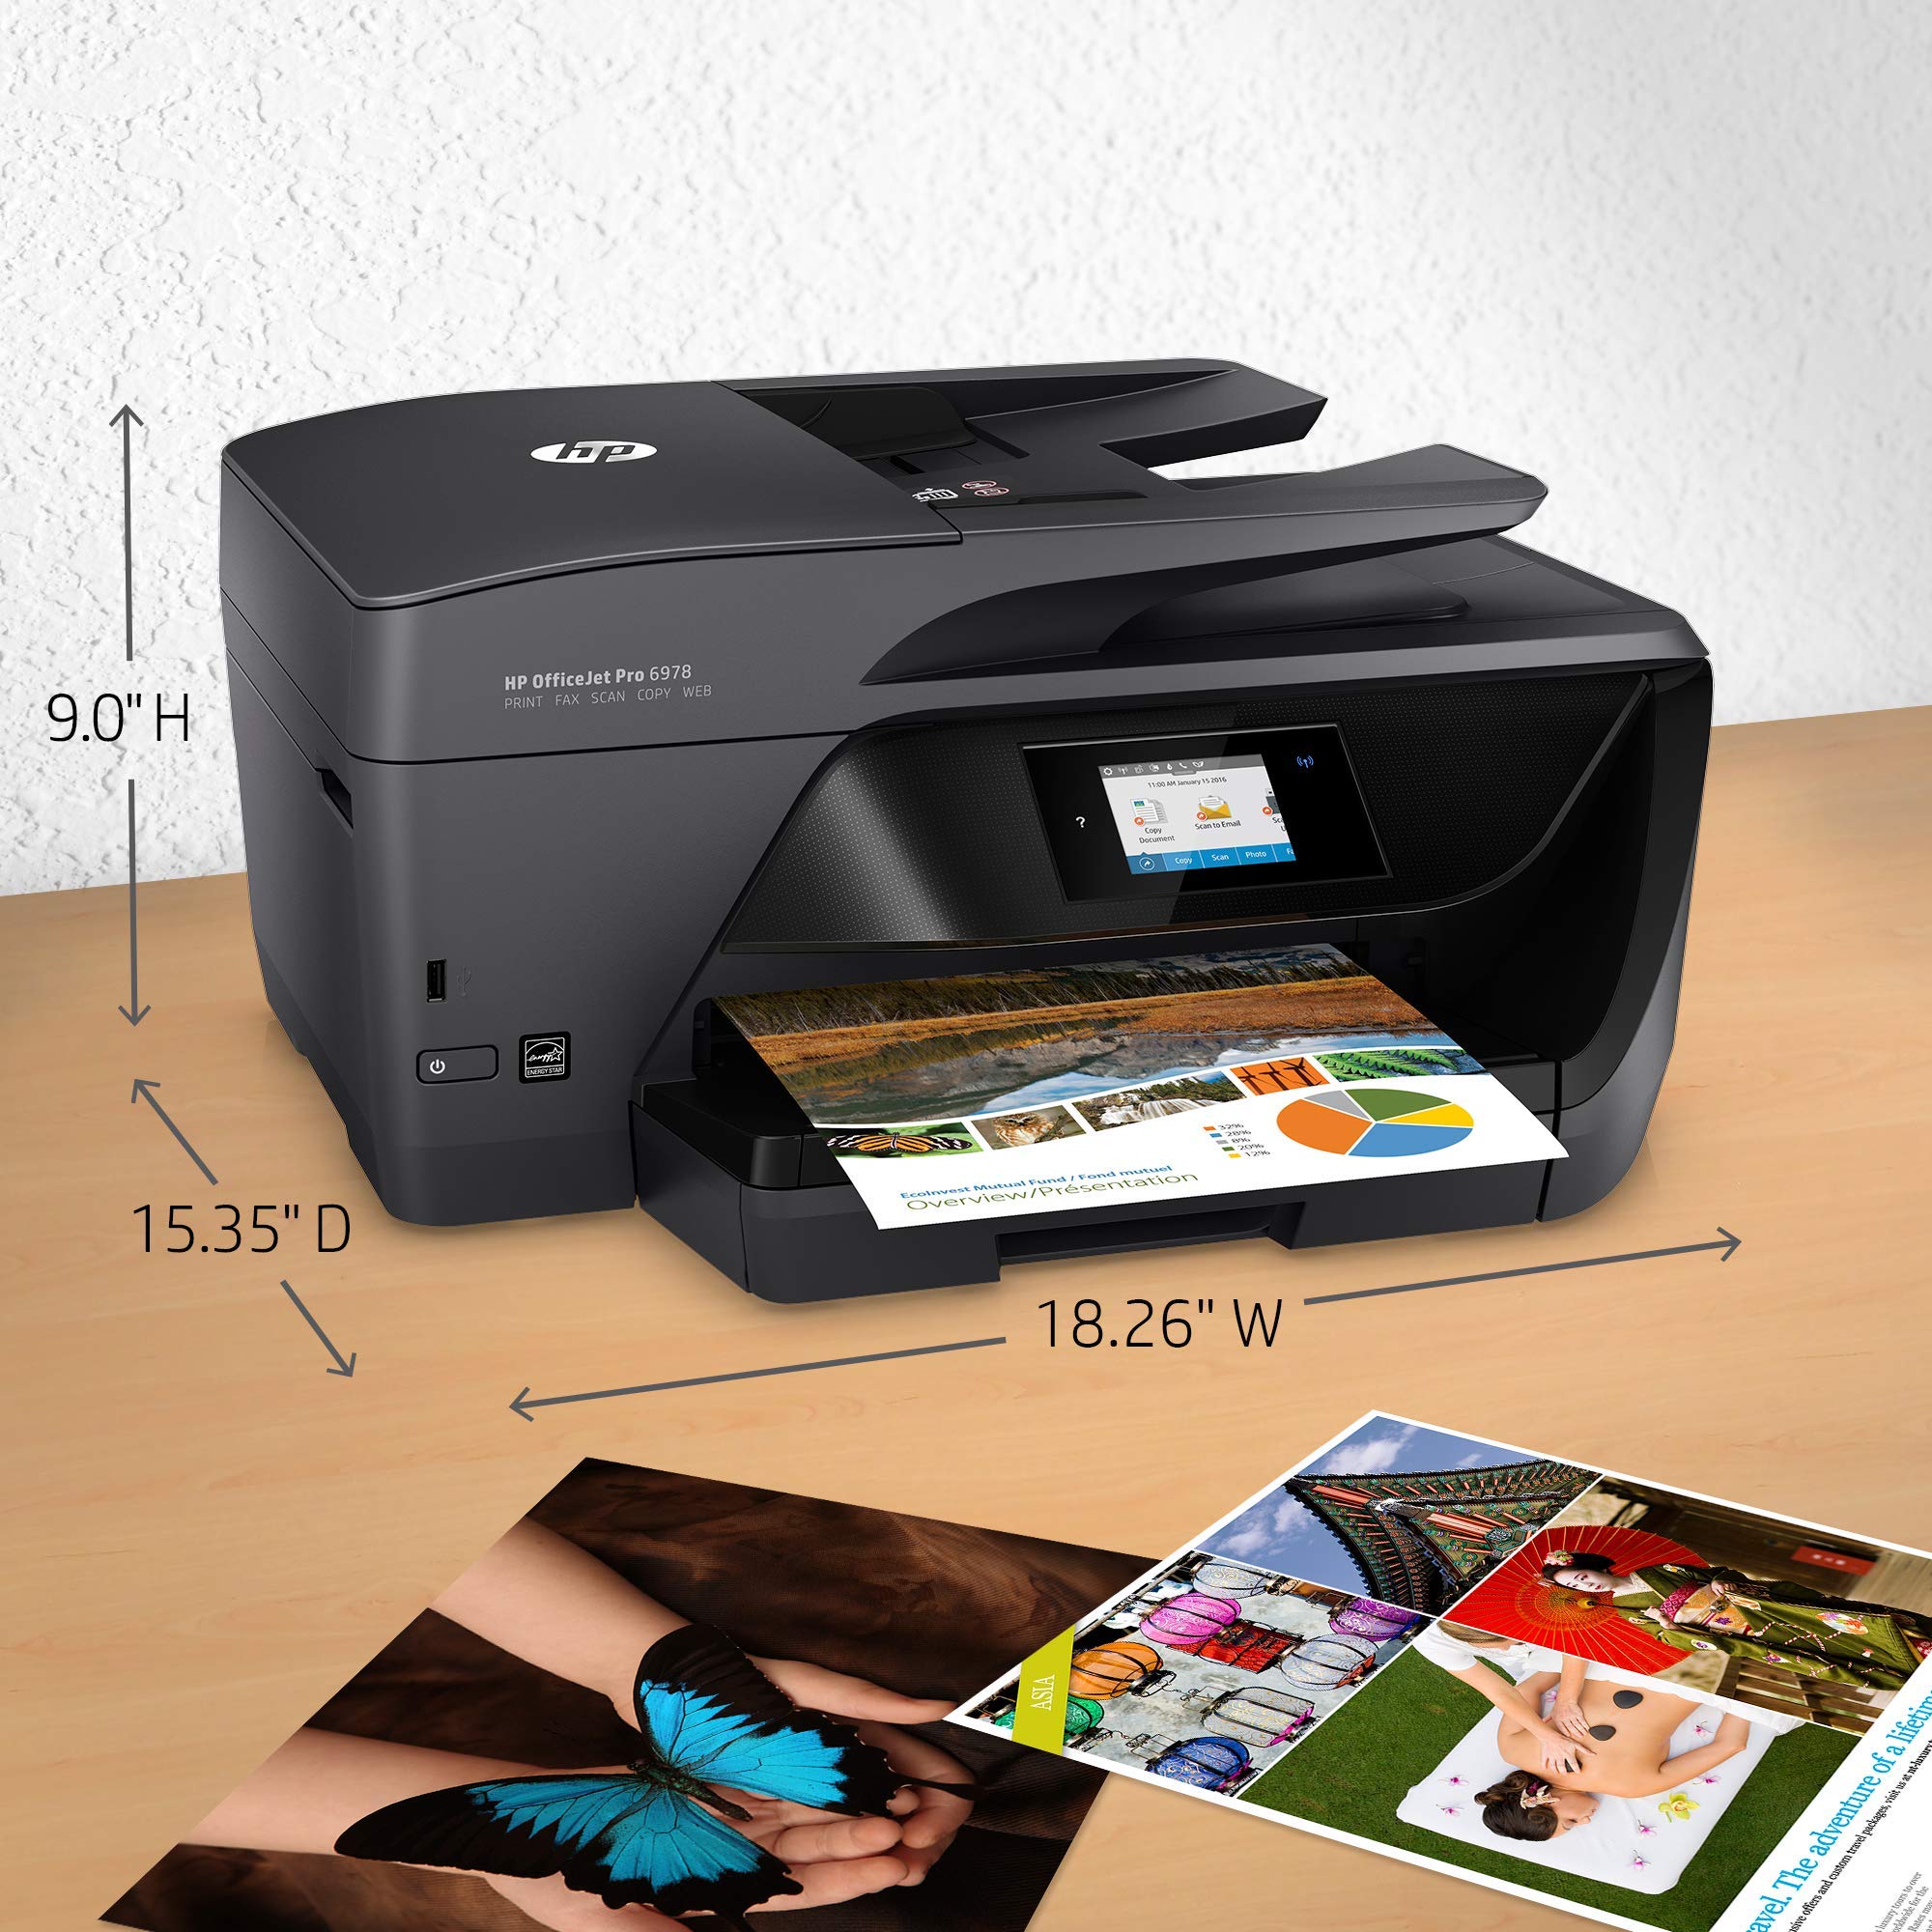 How to Master your HP Officejet Pro 6978 Printer: 10 Essential Tips